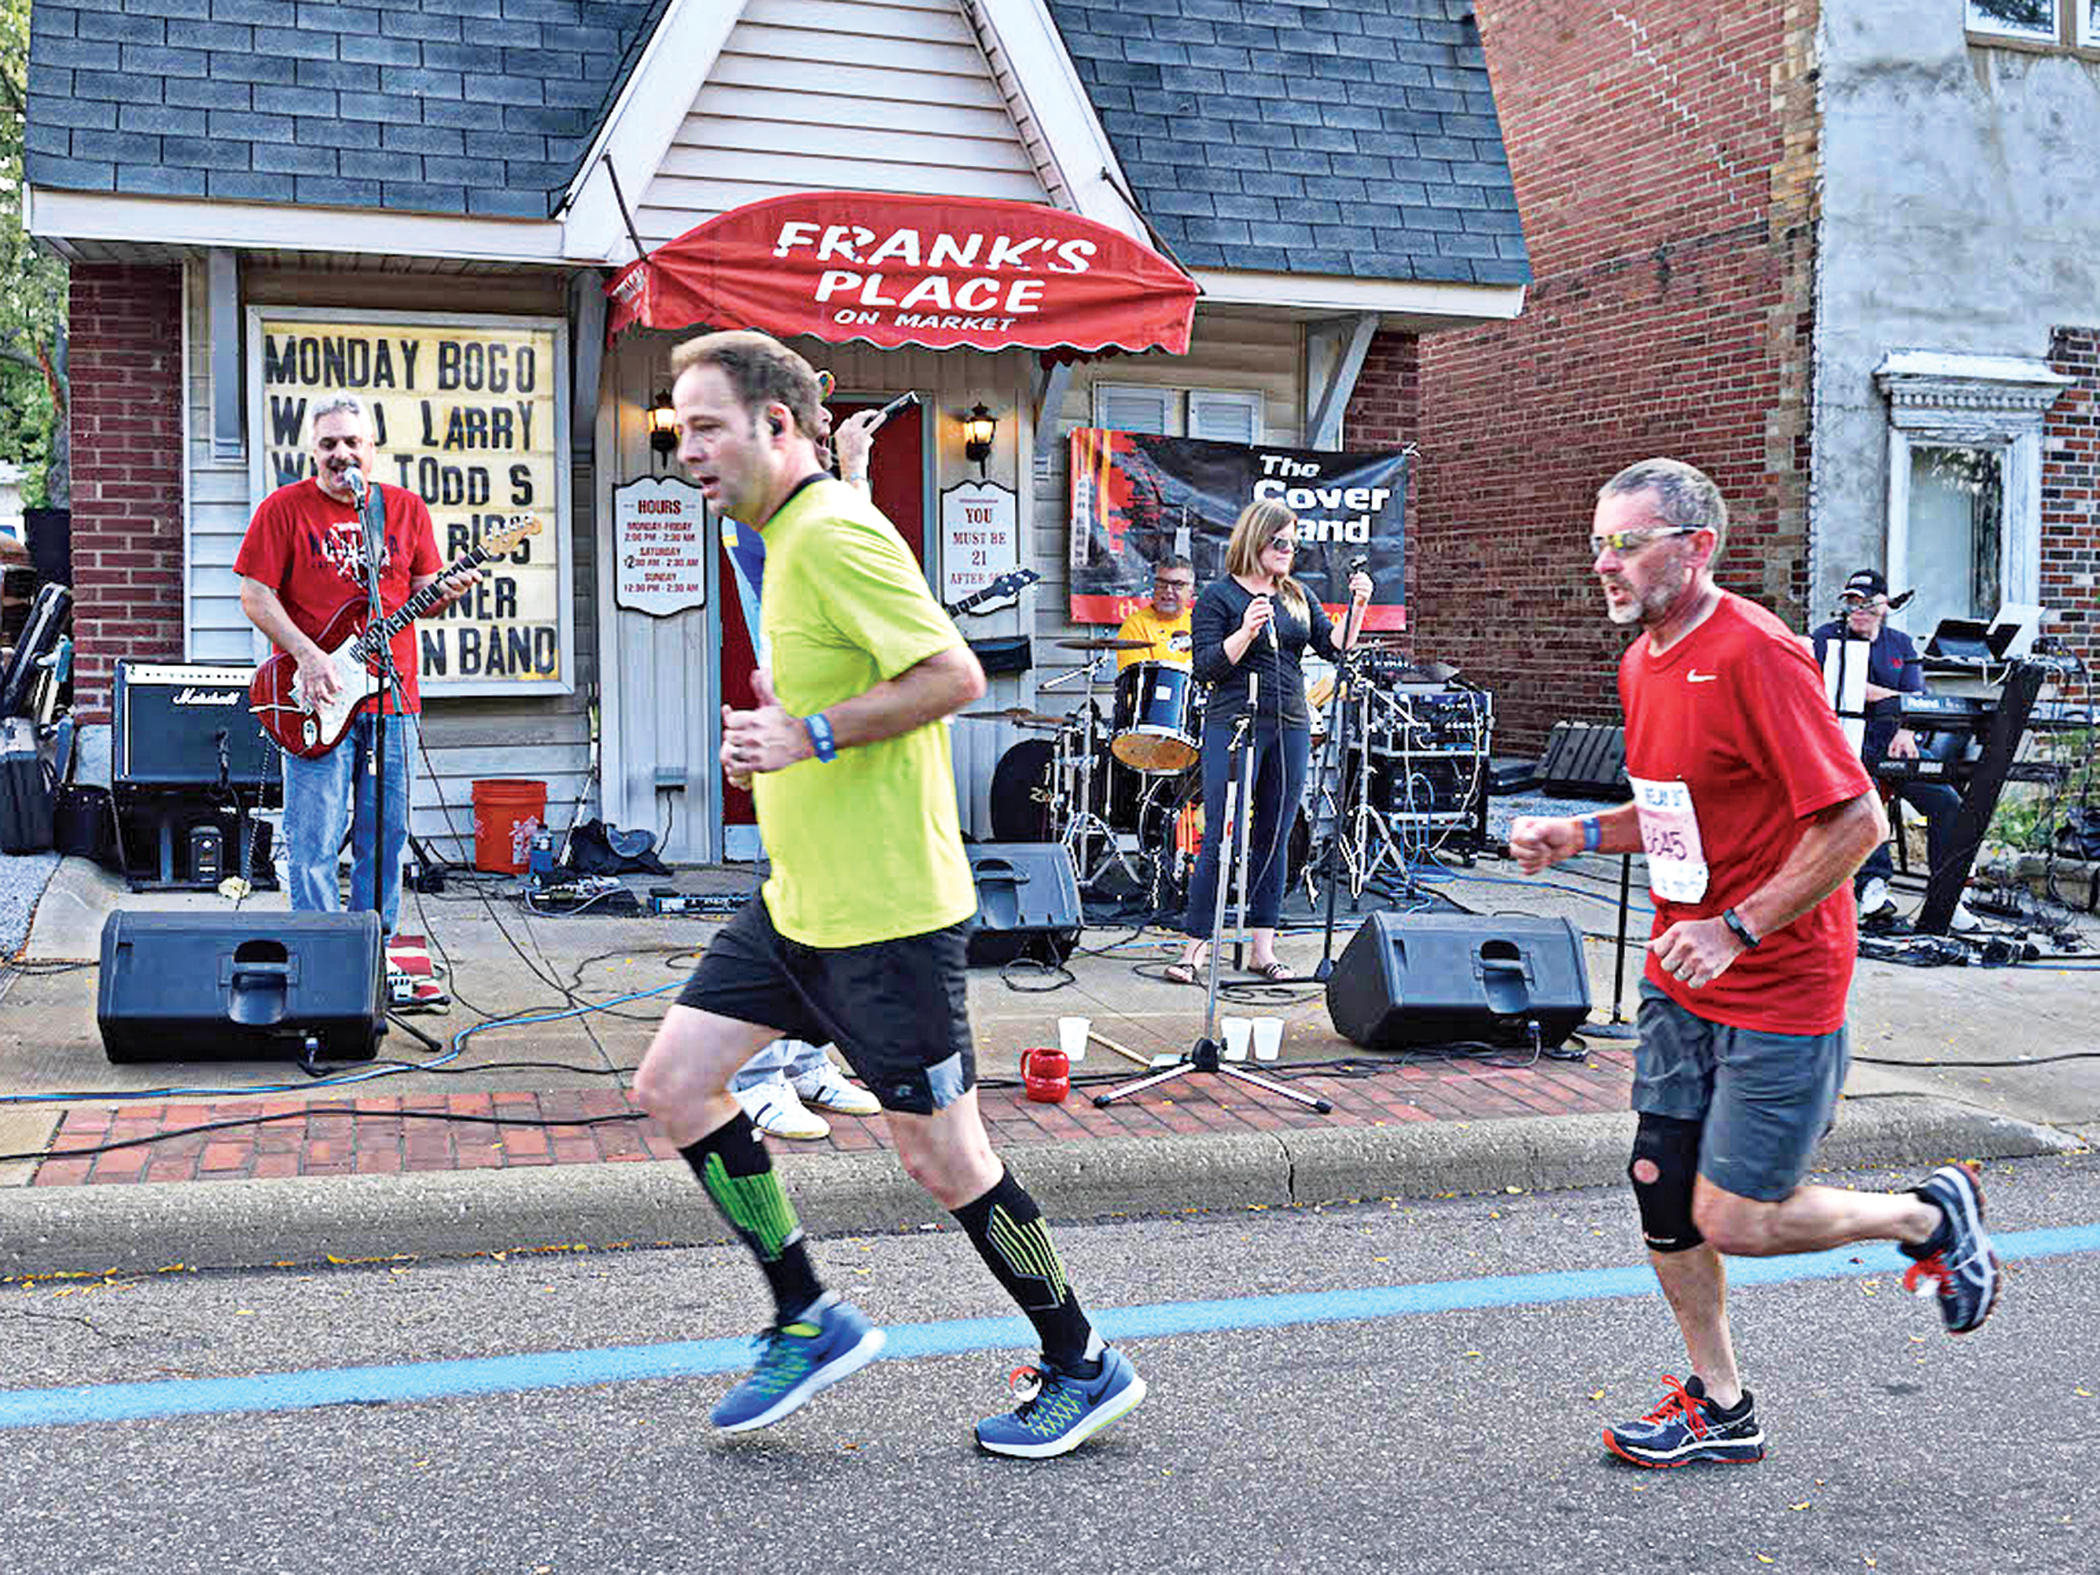 Runners in Highland Square run past a band performing